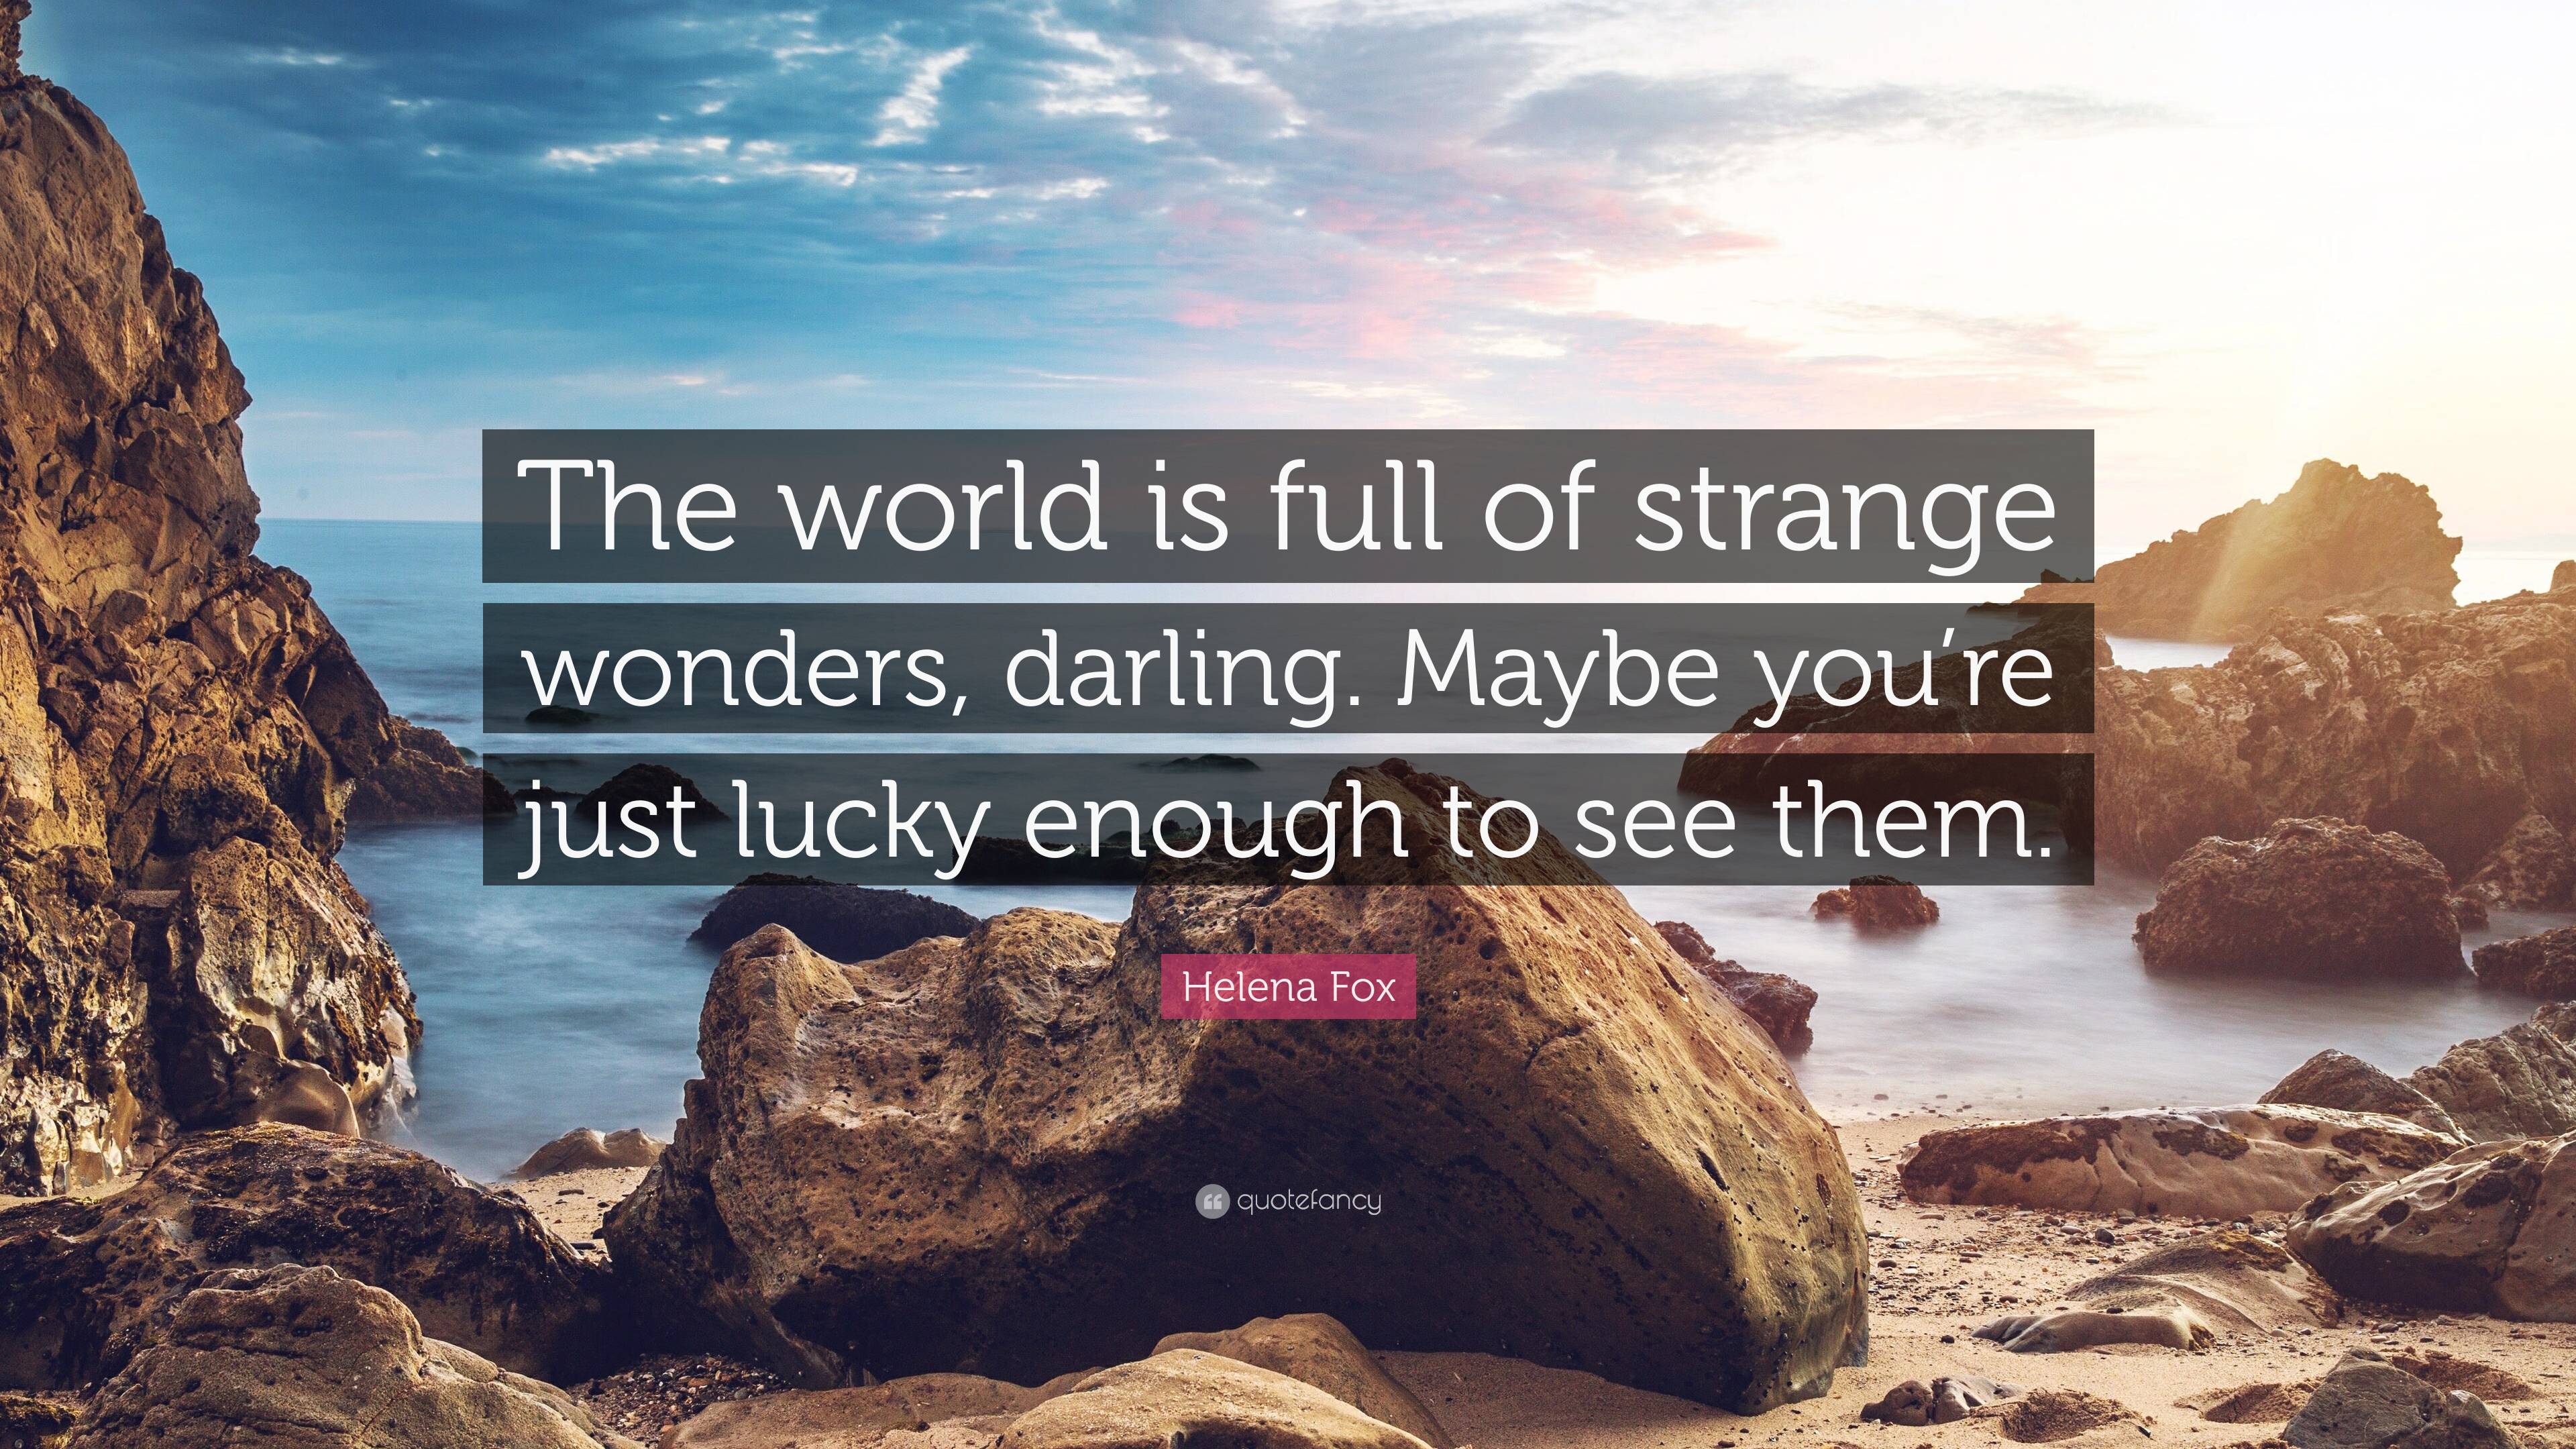 Helena Fox Quote: “The world is full of strange wonders, darling. Maybe  you're just lucky